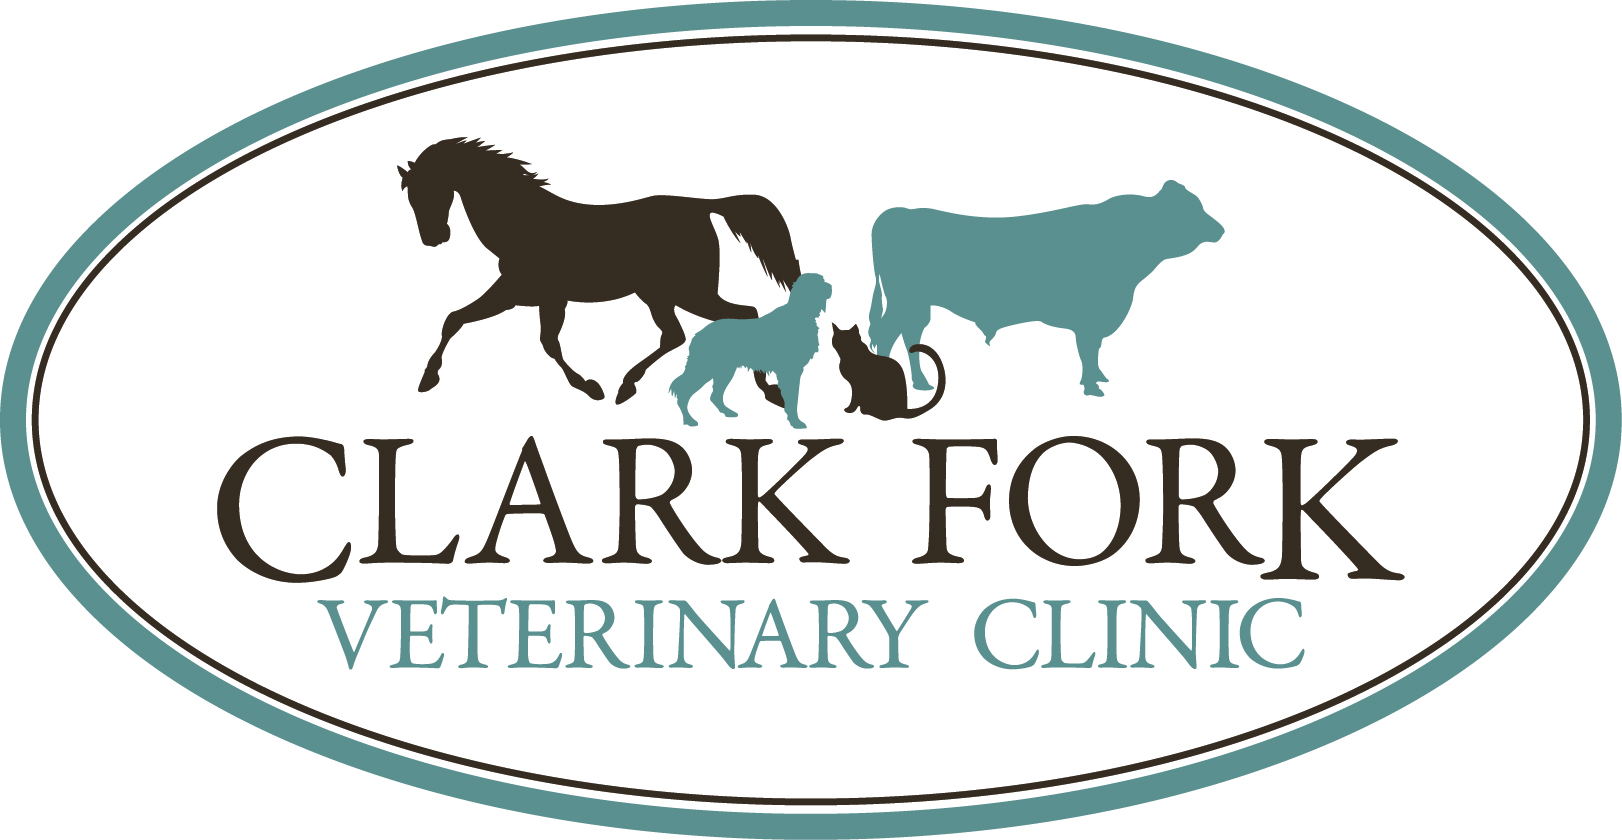 Our Veterinary Team and Staff — Clark Fork Veterinary Clinic